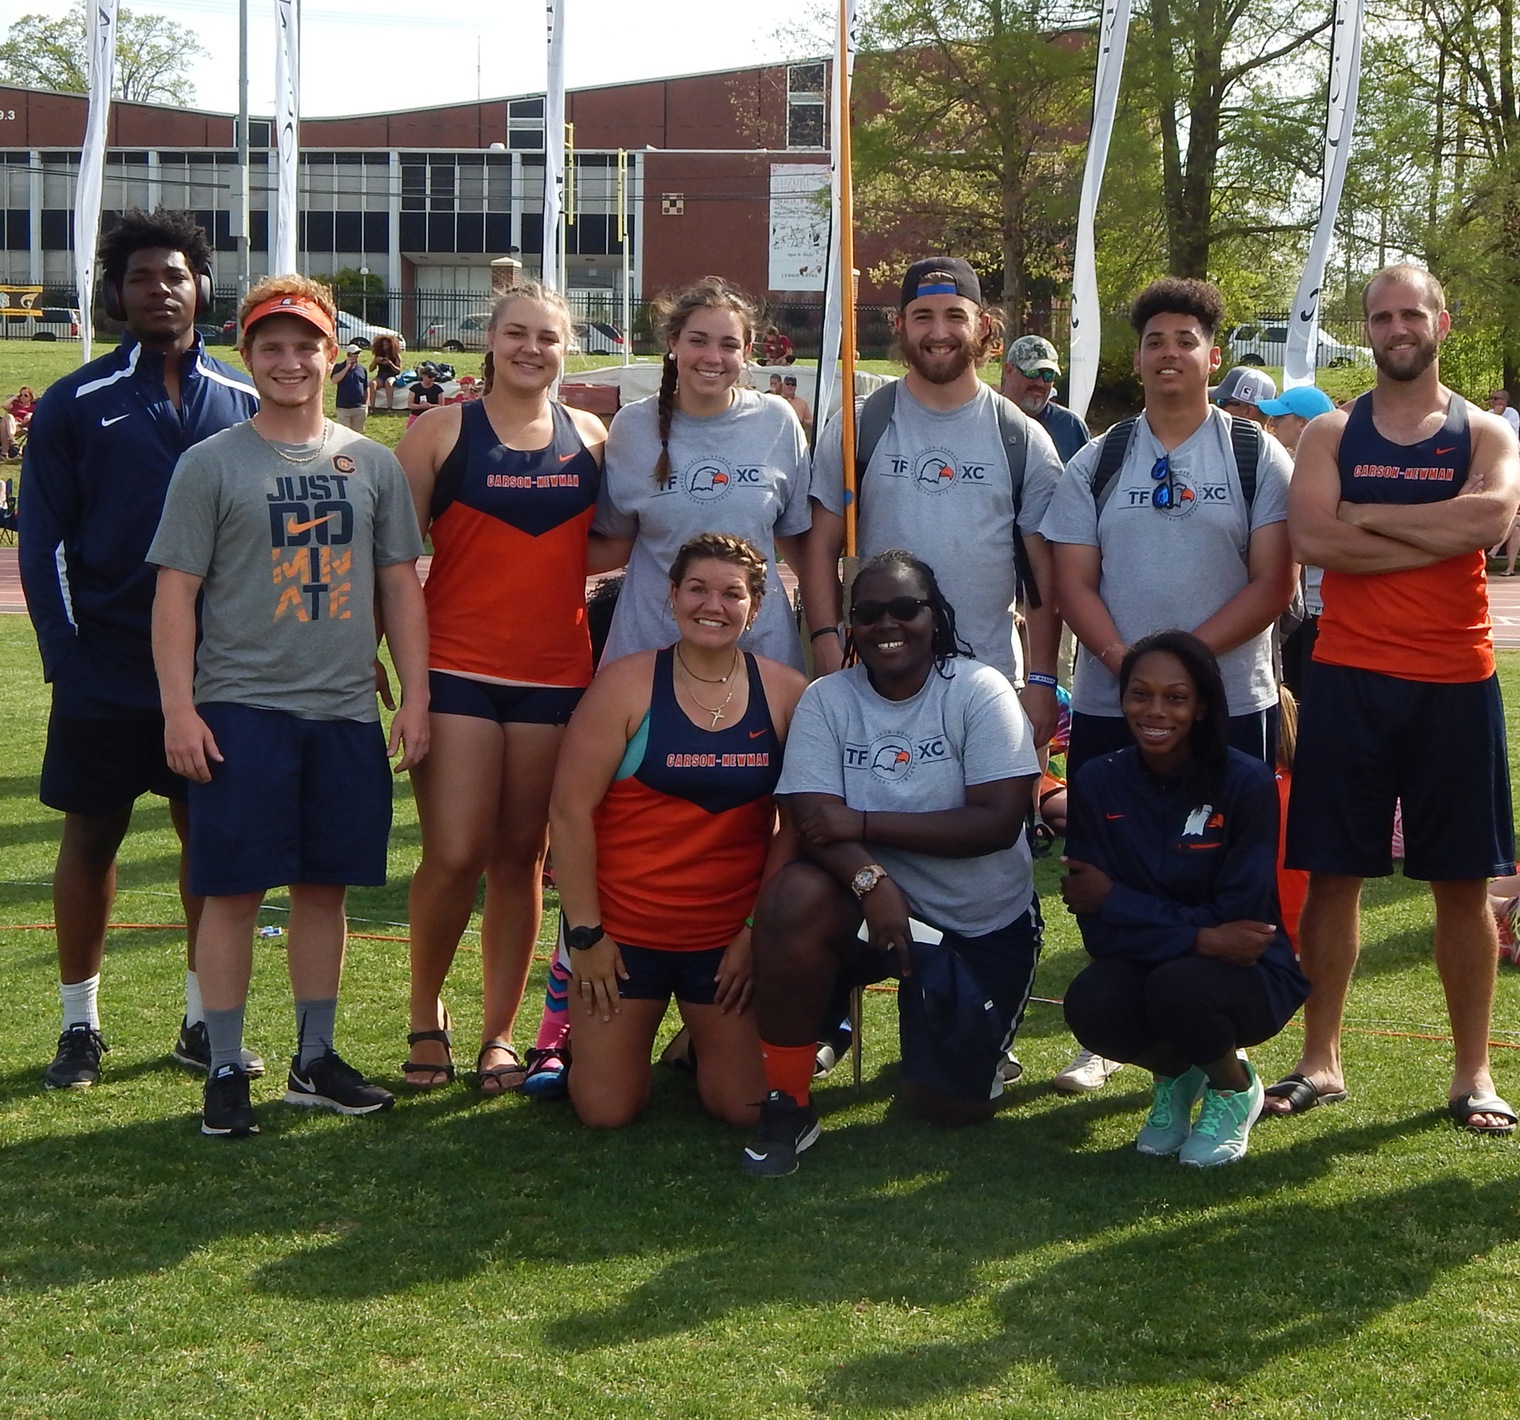 Men's and Women's track teams named USTFCCCA All-Academic 2016-2017